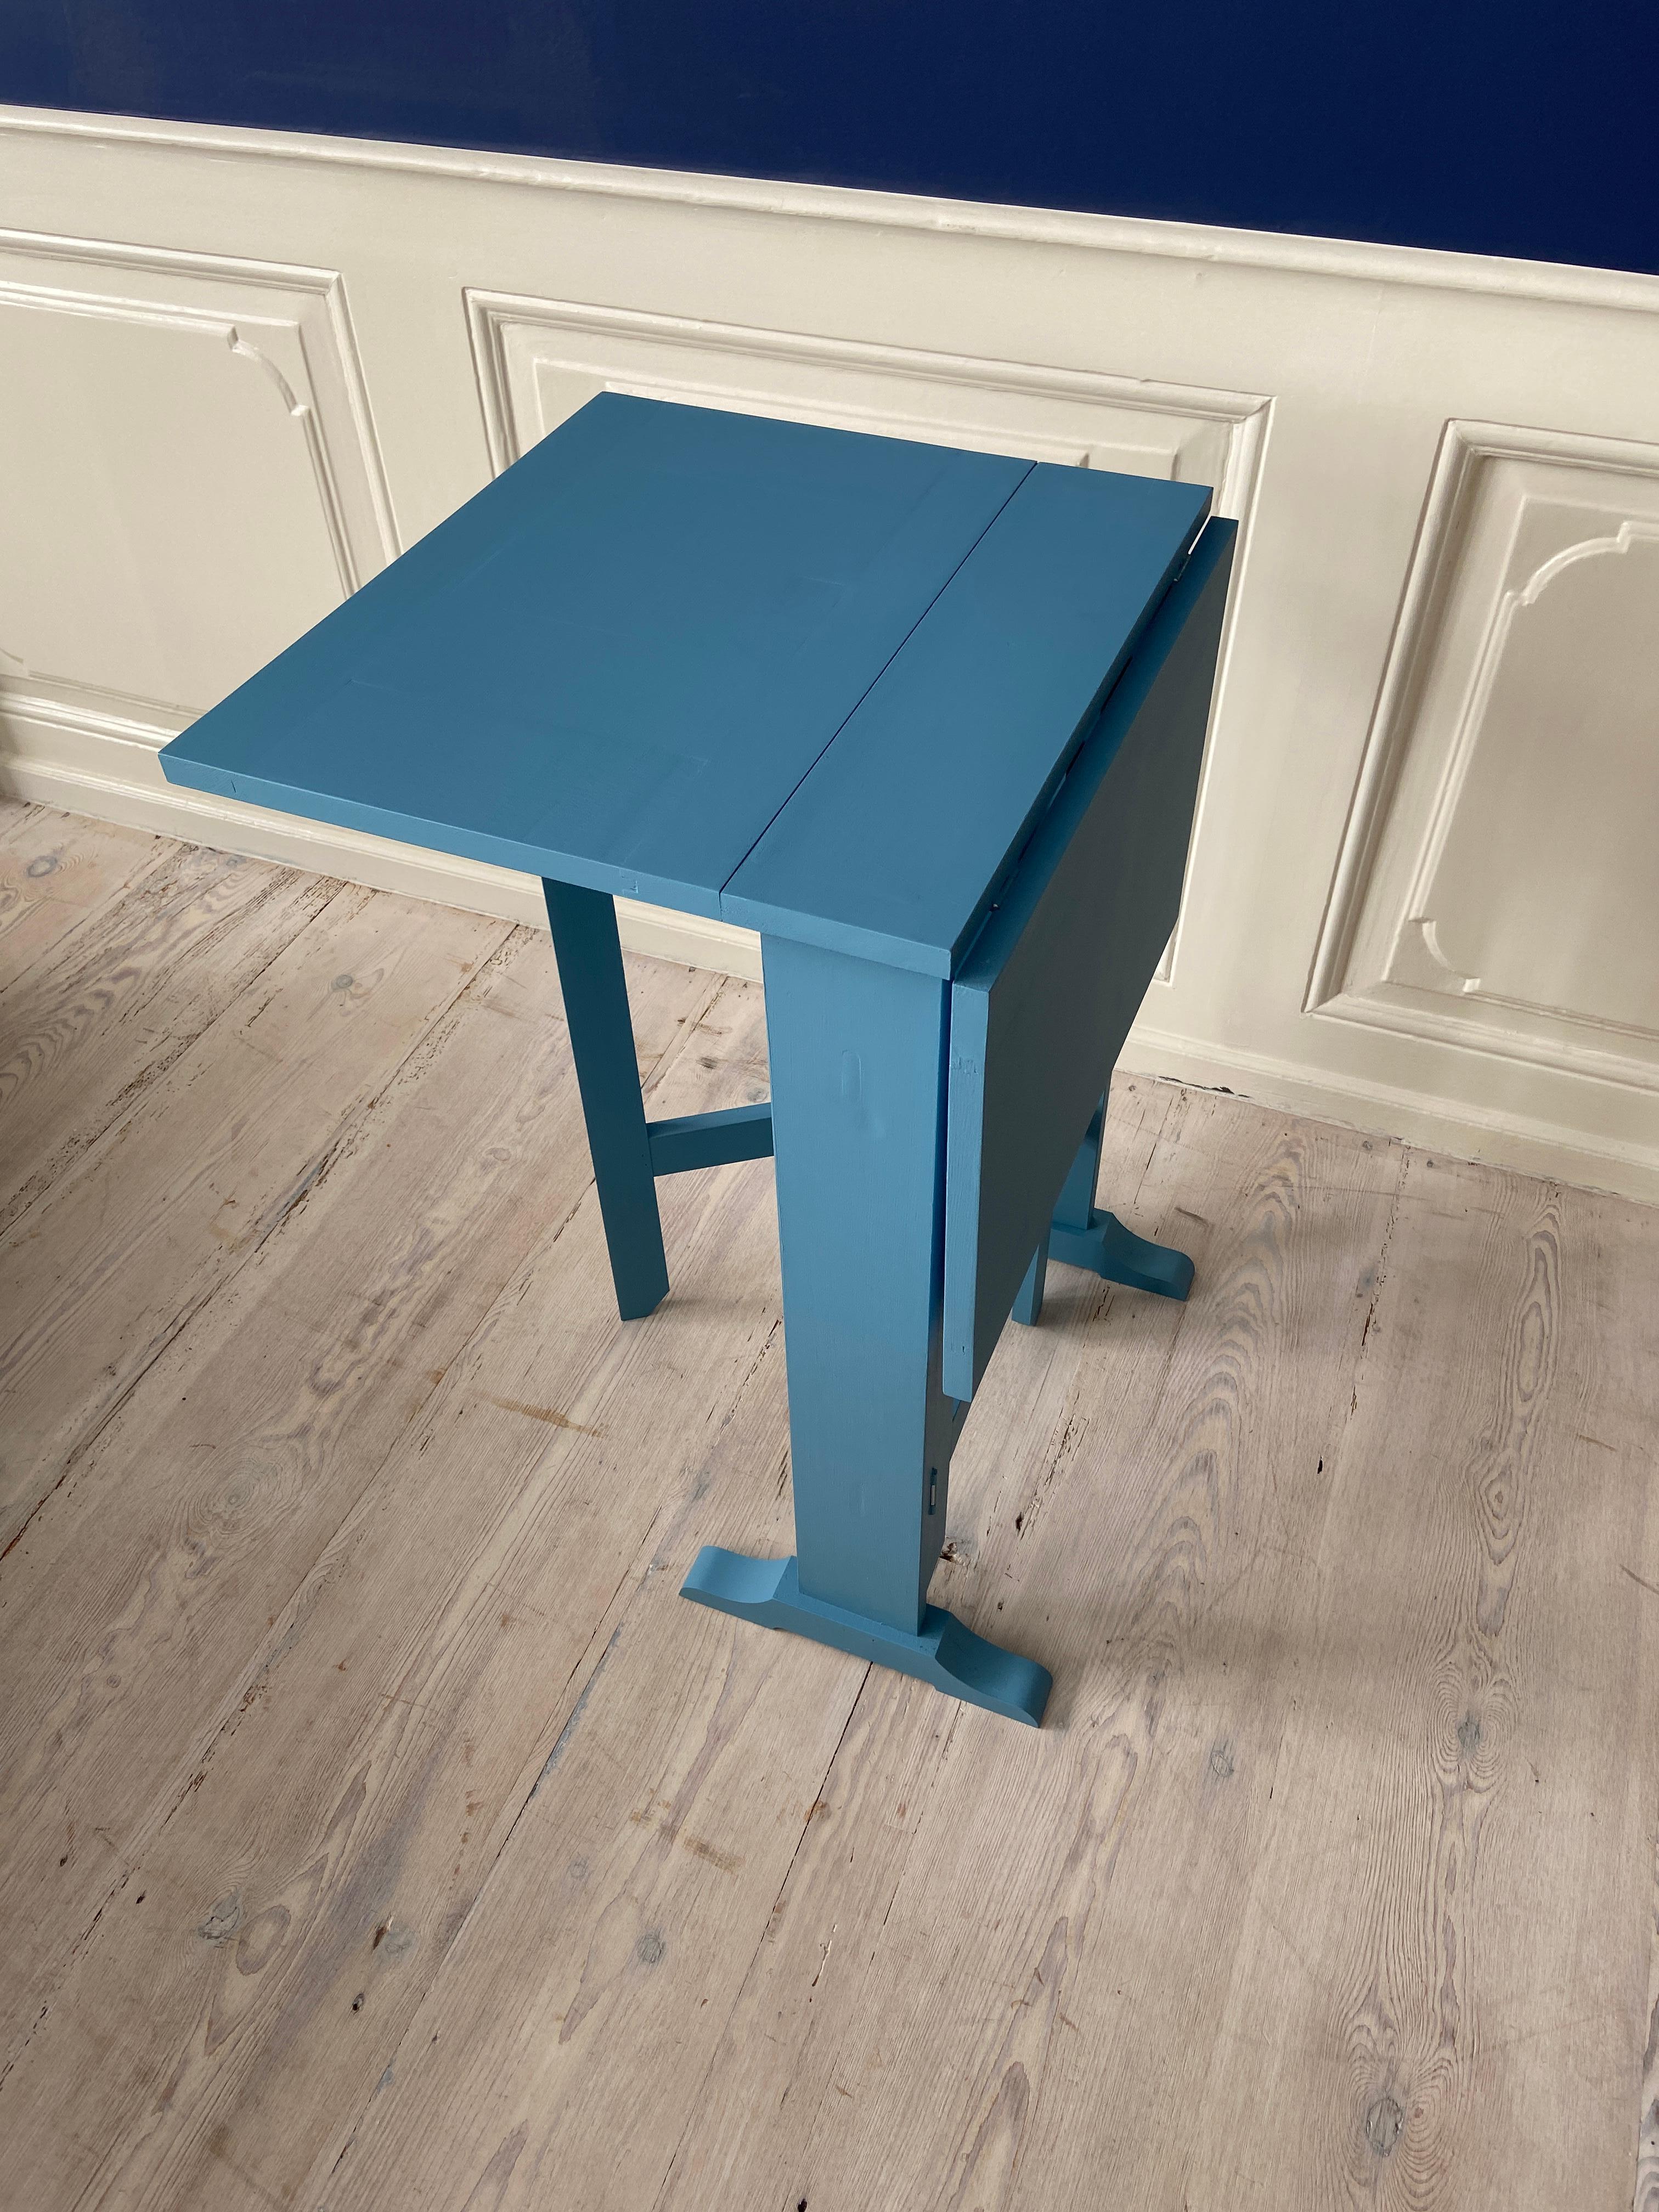 Contemporary Drop Leaf Table in Light Blue Painted Wood, Belgium For Sale 1